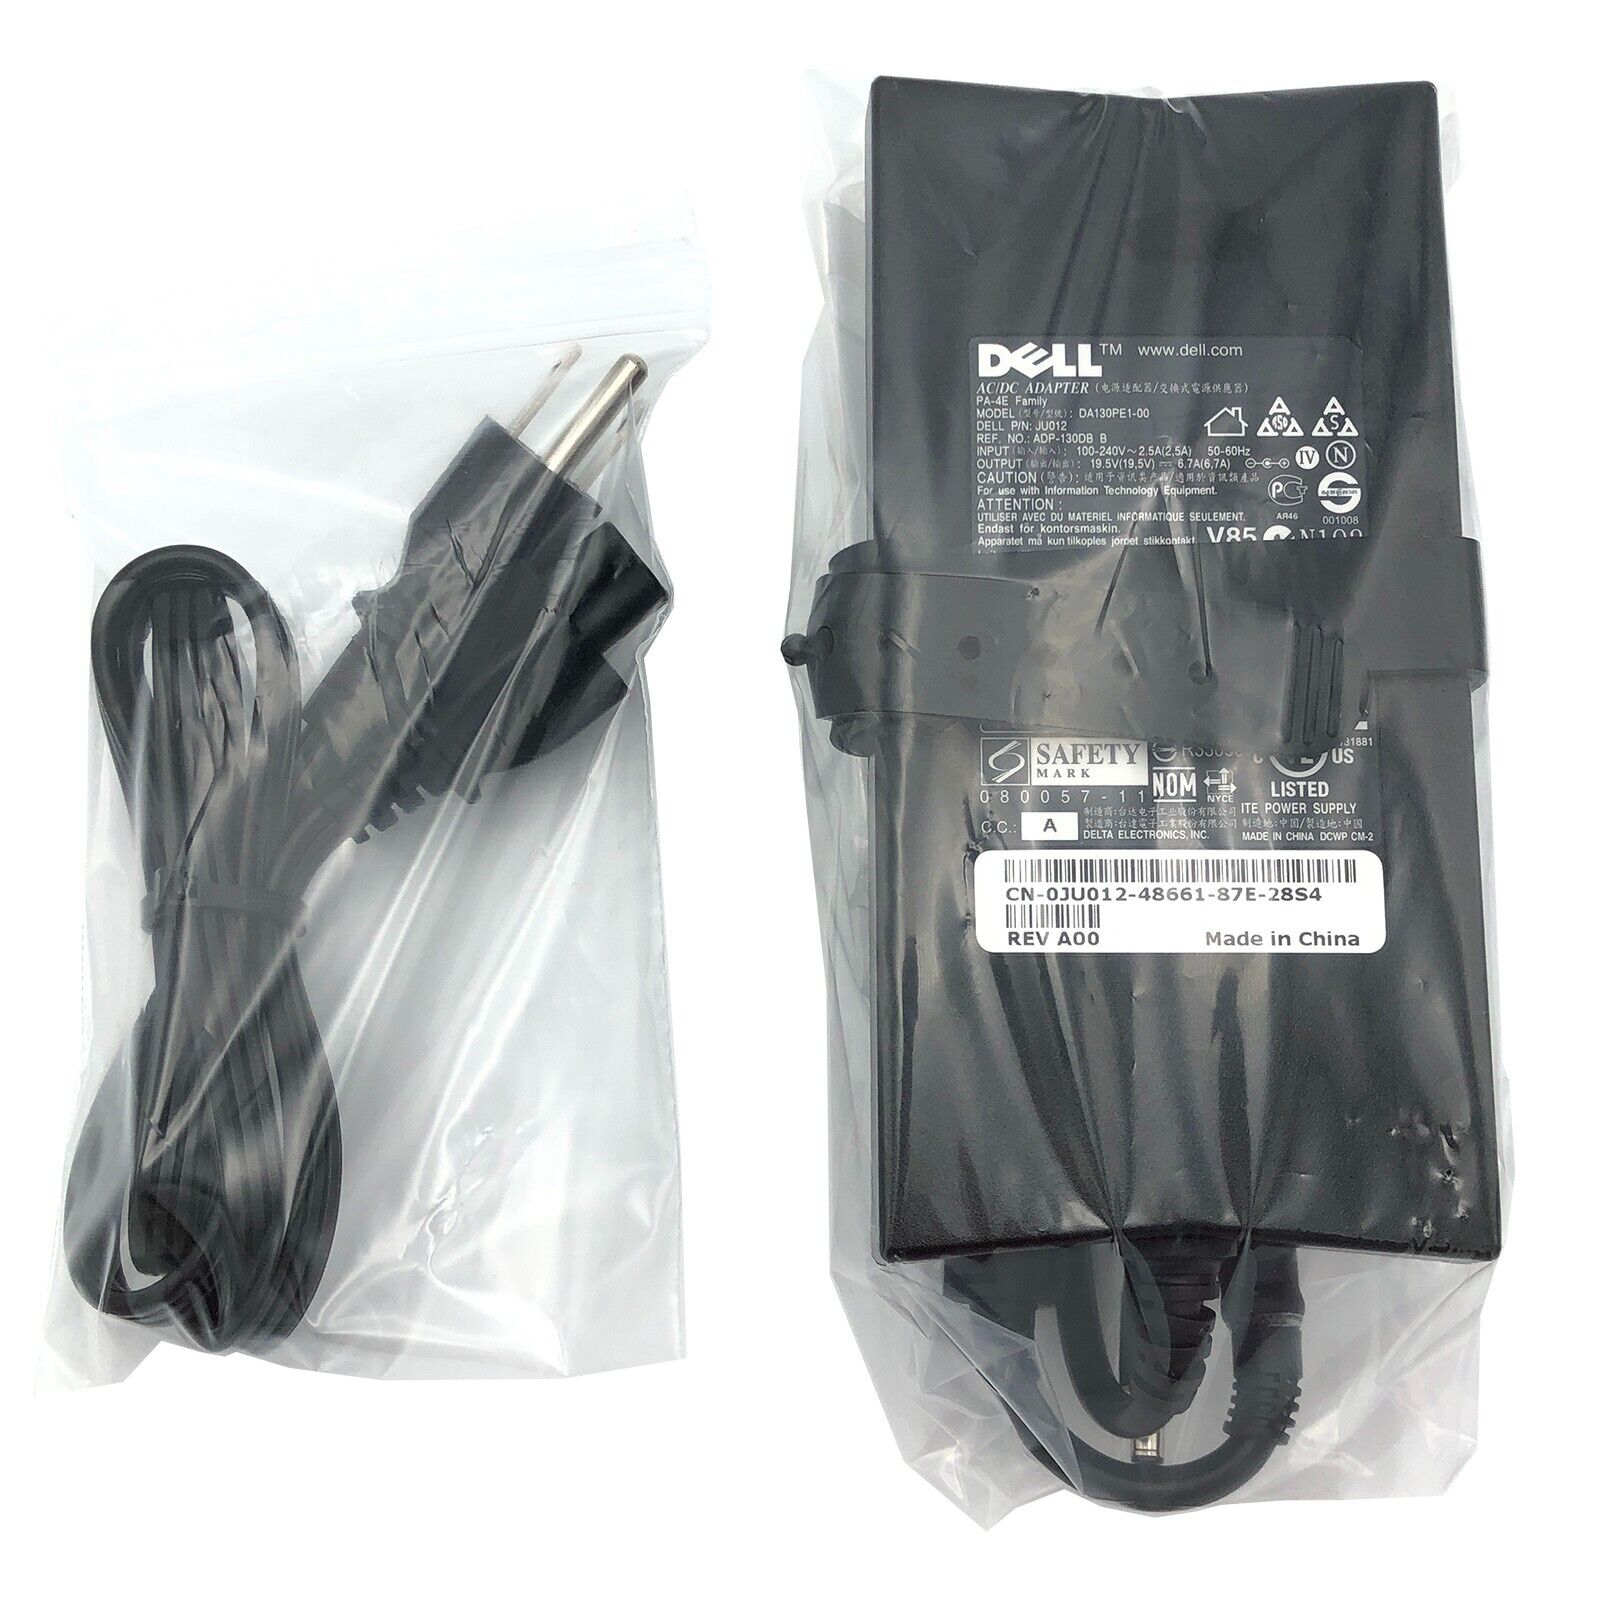 NEW OEM Dell 130W AC Adapter 4.5mm For OptiPlex 5060 5070 5080 5090 Micro